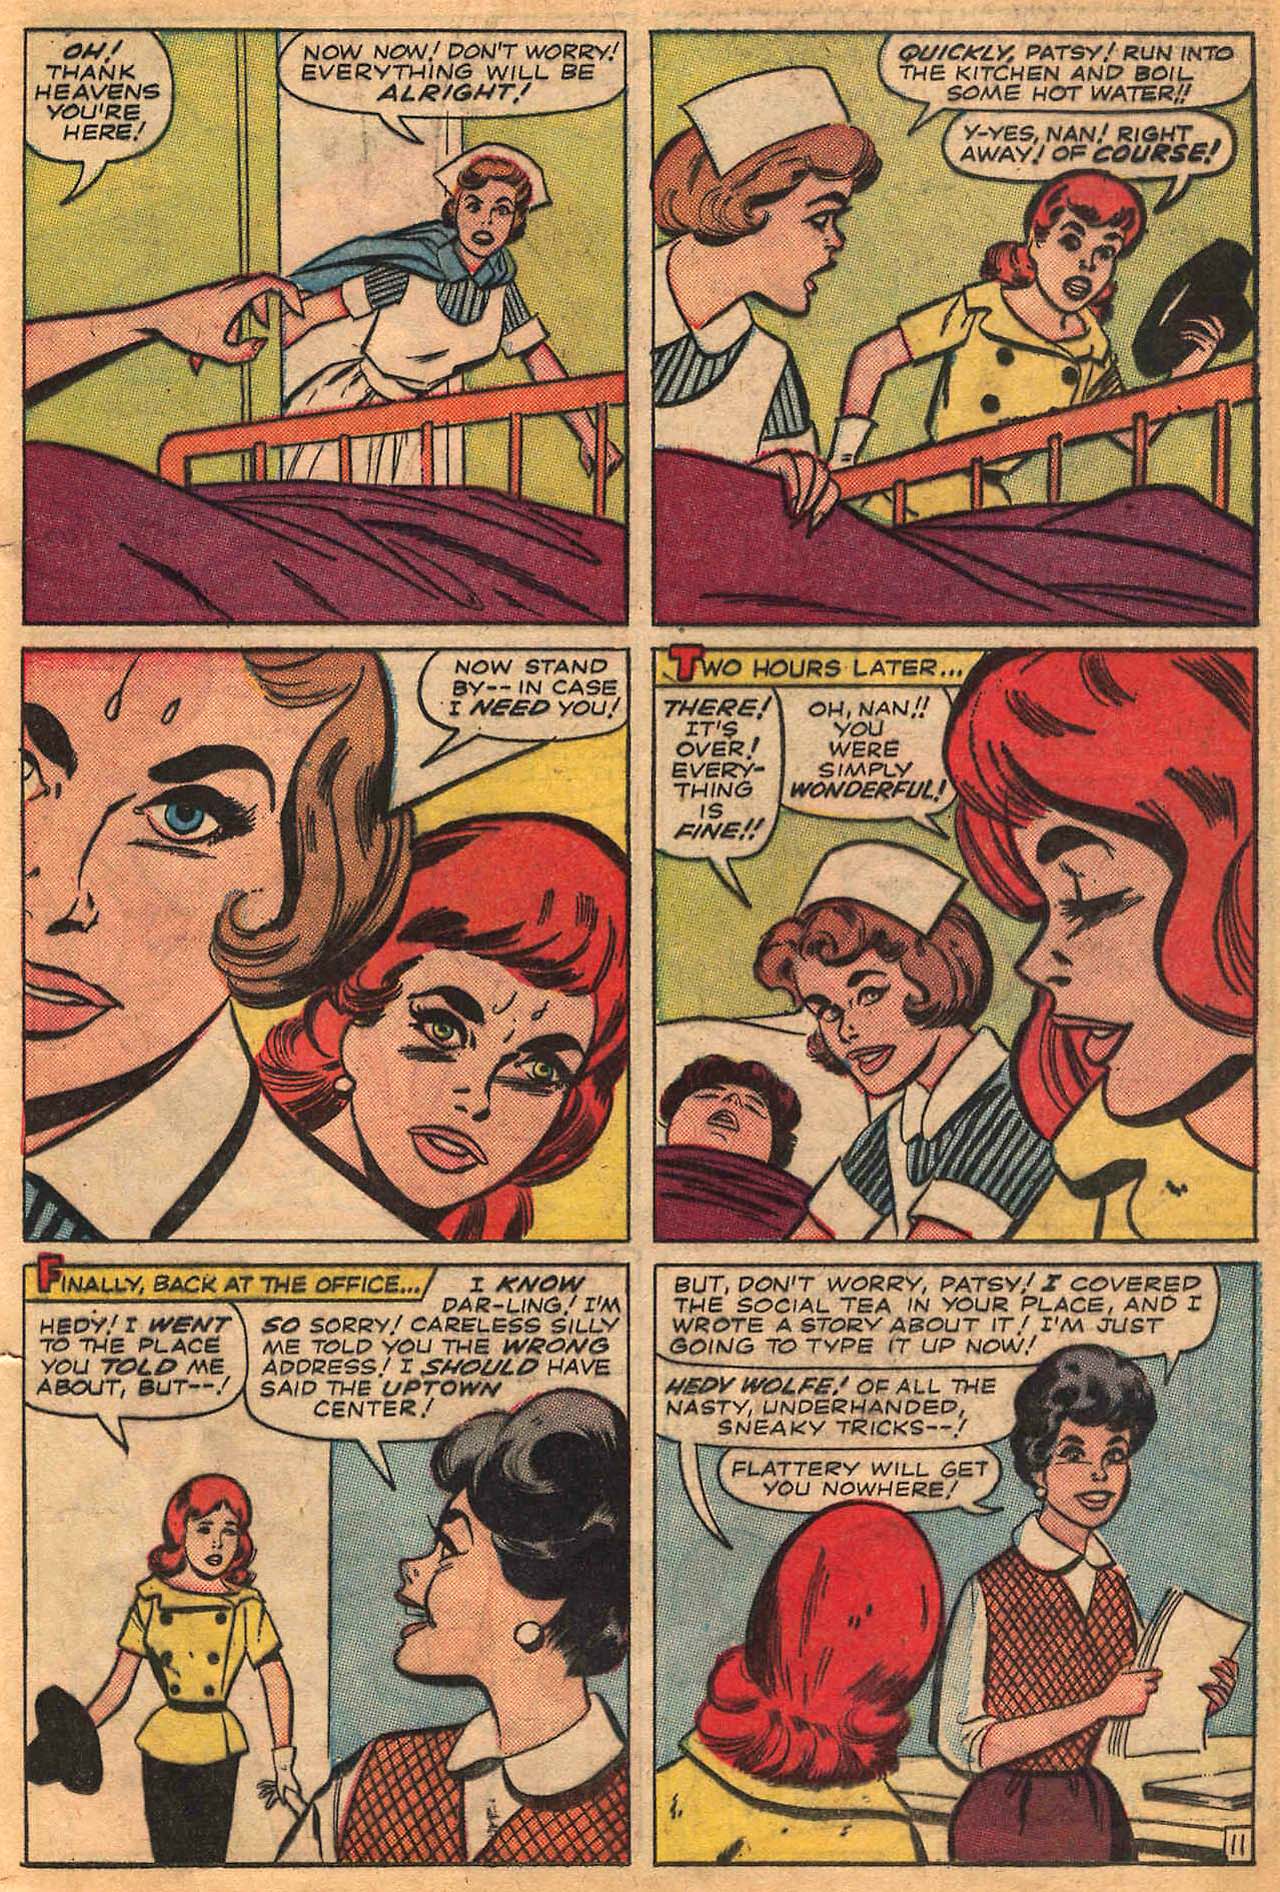 Read online Patsy and Hedy comic -  Issue #96 - 21